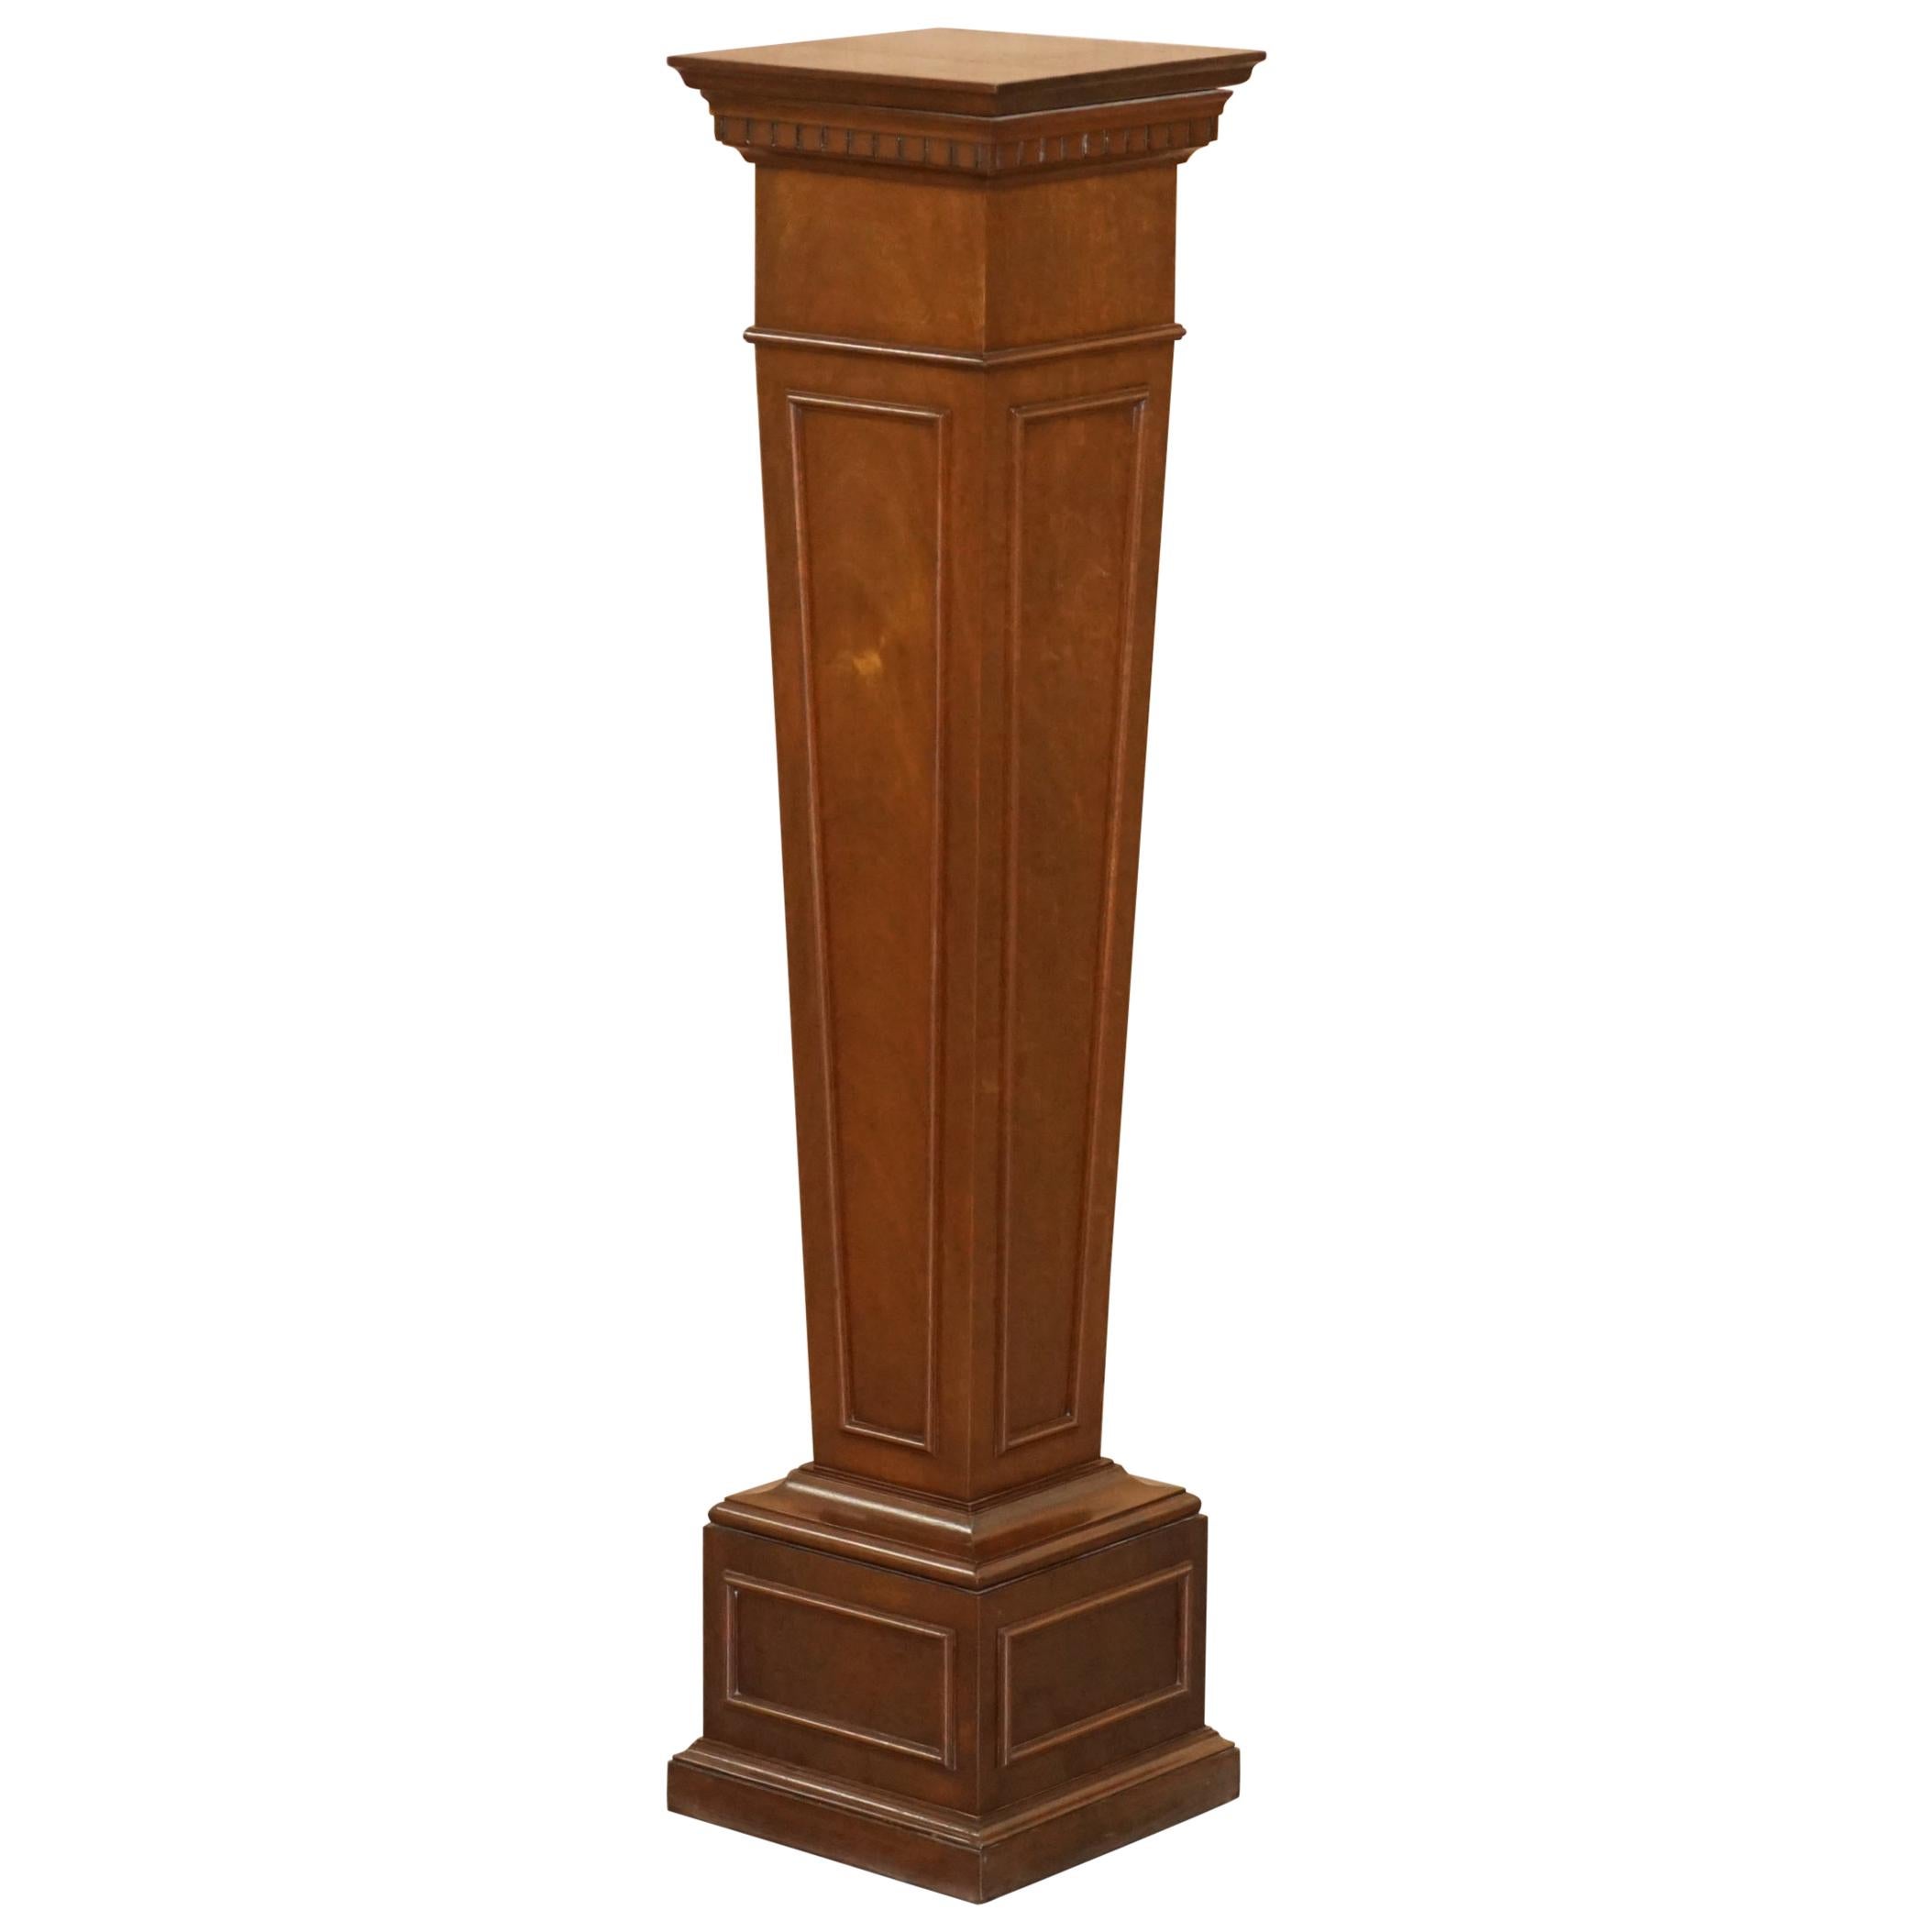 Regency Style Walnut circa 1900 Pedestal Jardiniere Stand for Busts Statues Etc